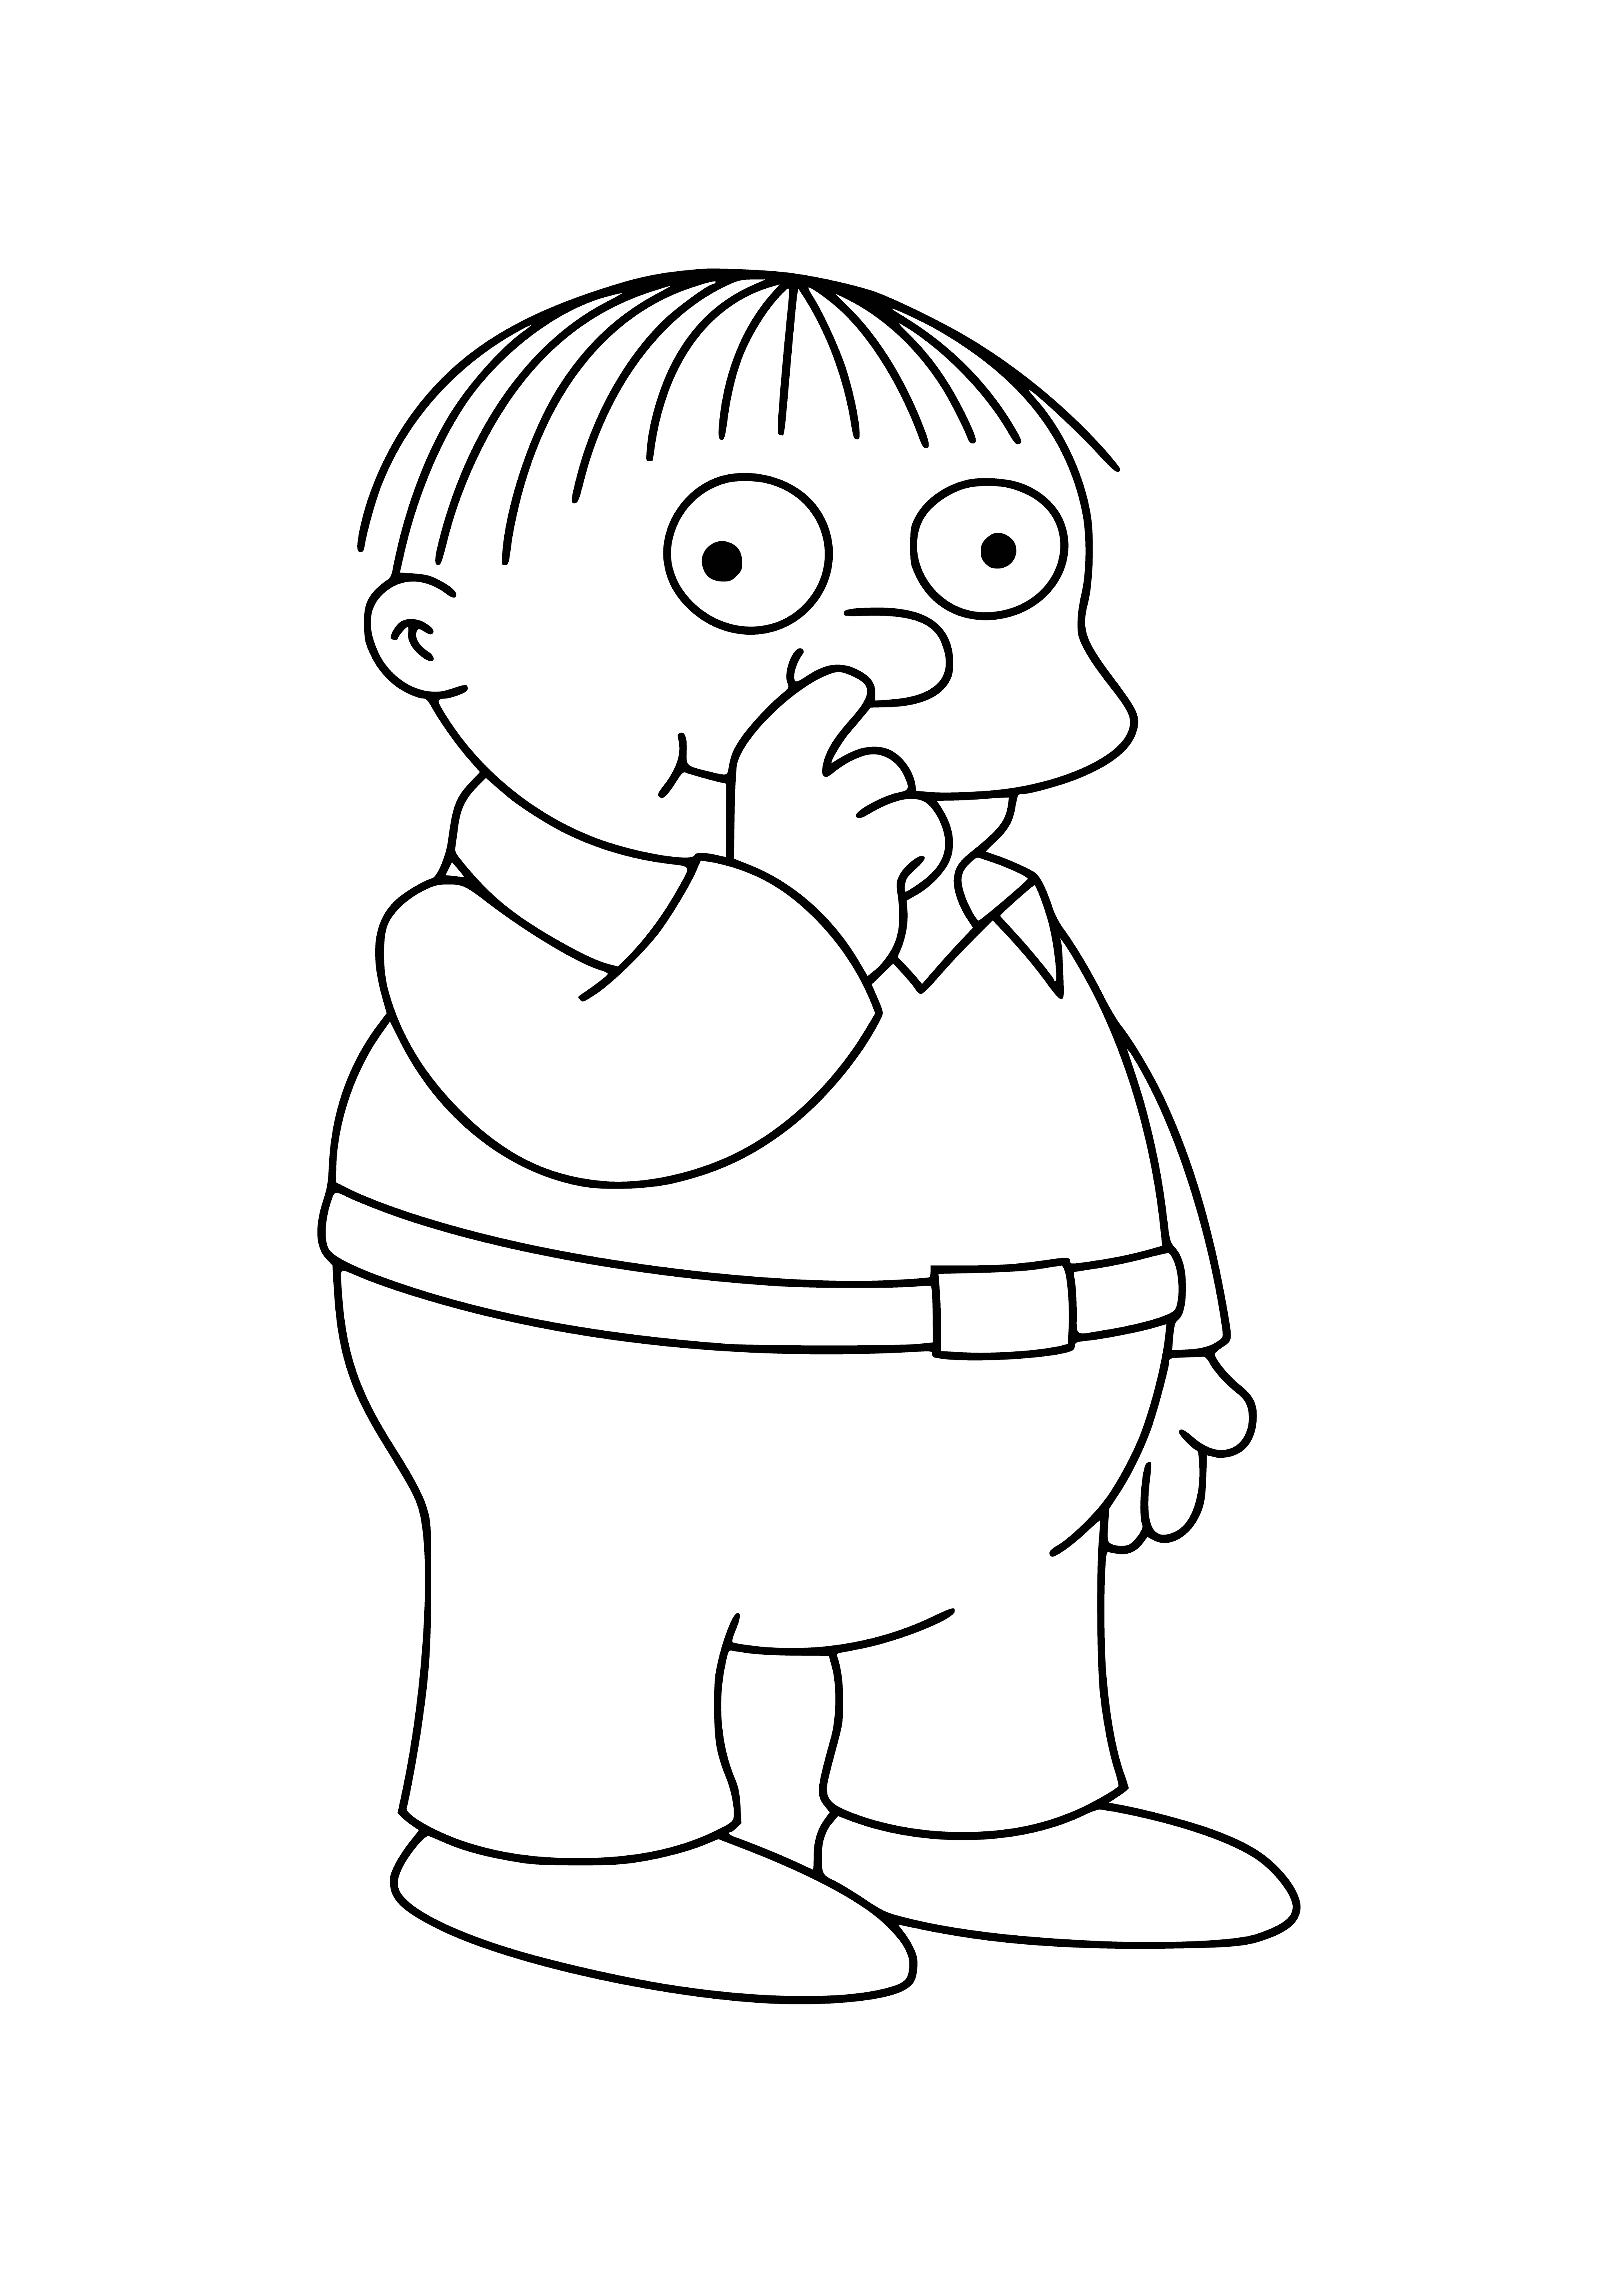 coloring page: The boy in the coloring page is Ralph Wiggum, cheerful son of Sheriff Wiggum who always wears a big smile.